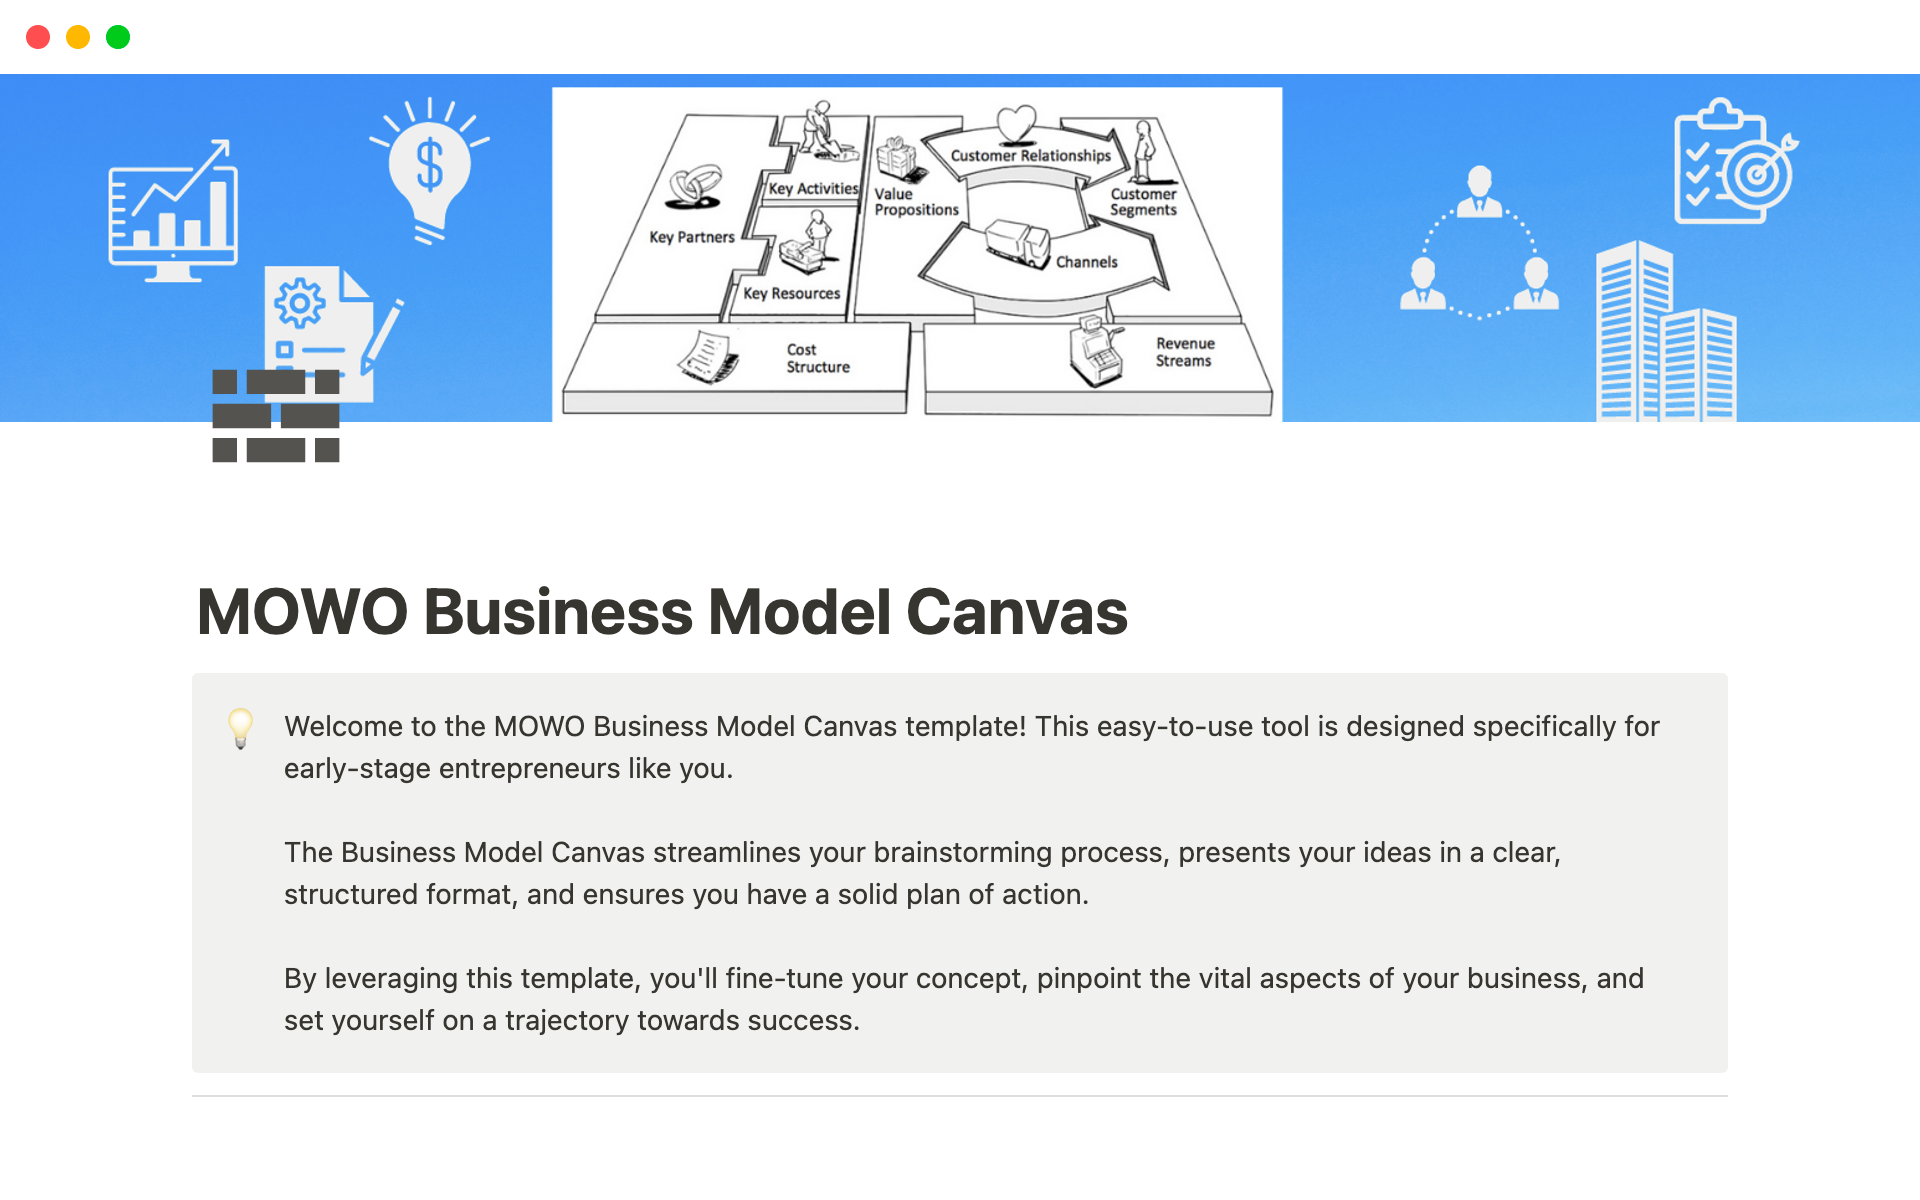 The Notion Business Canvas Model Template helps aspiring and early-stage entrepreneurs structure and organize their business ideas using the widely accepted Business Model Canvas tool.